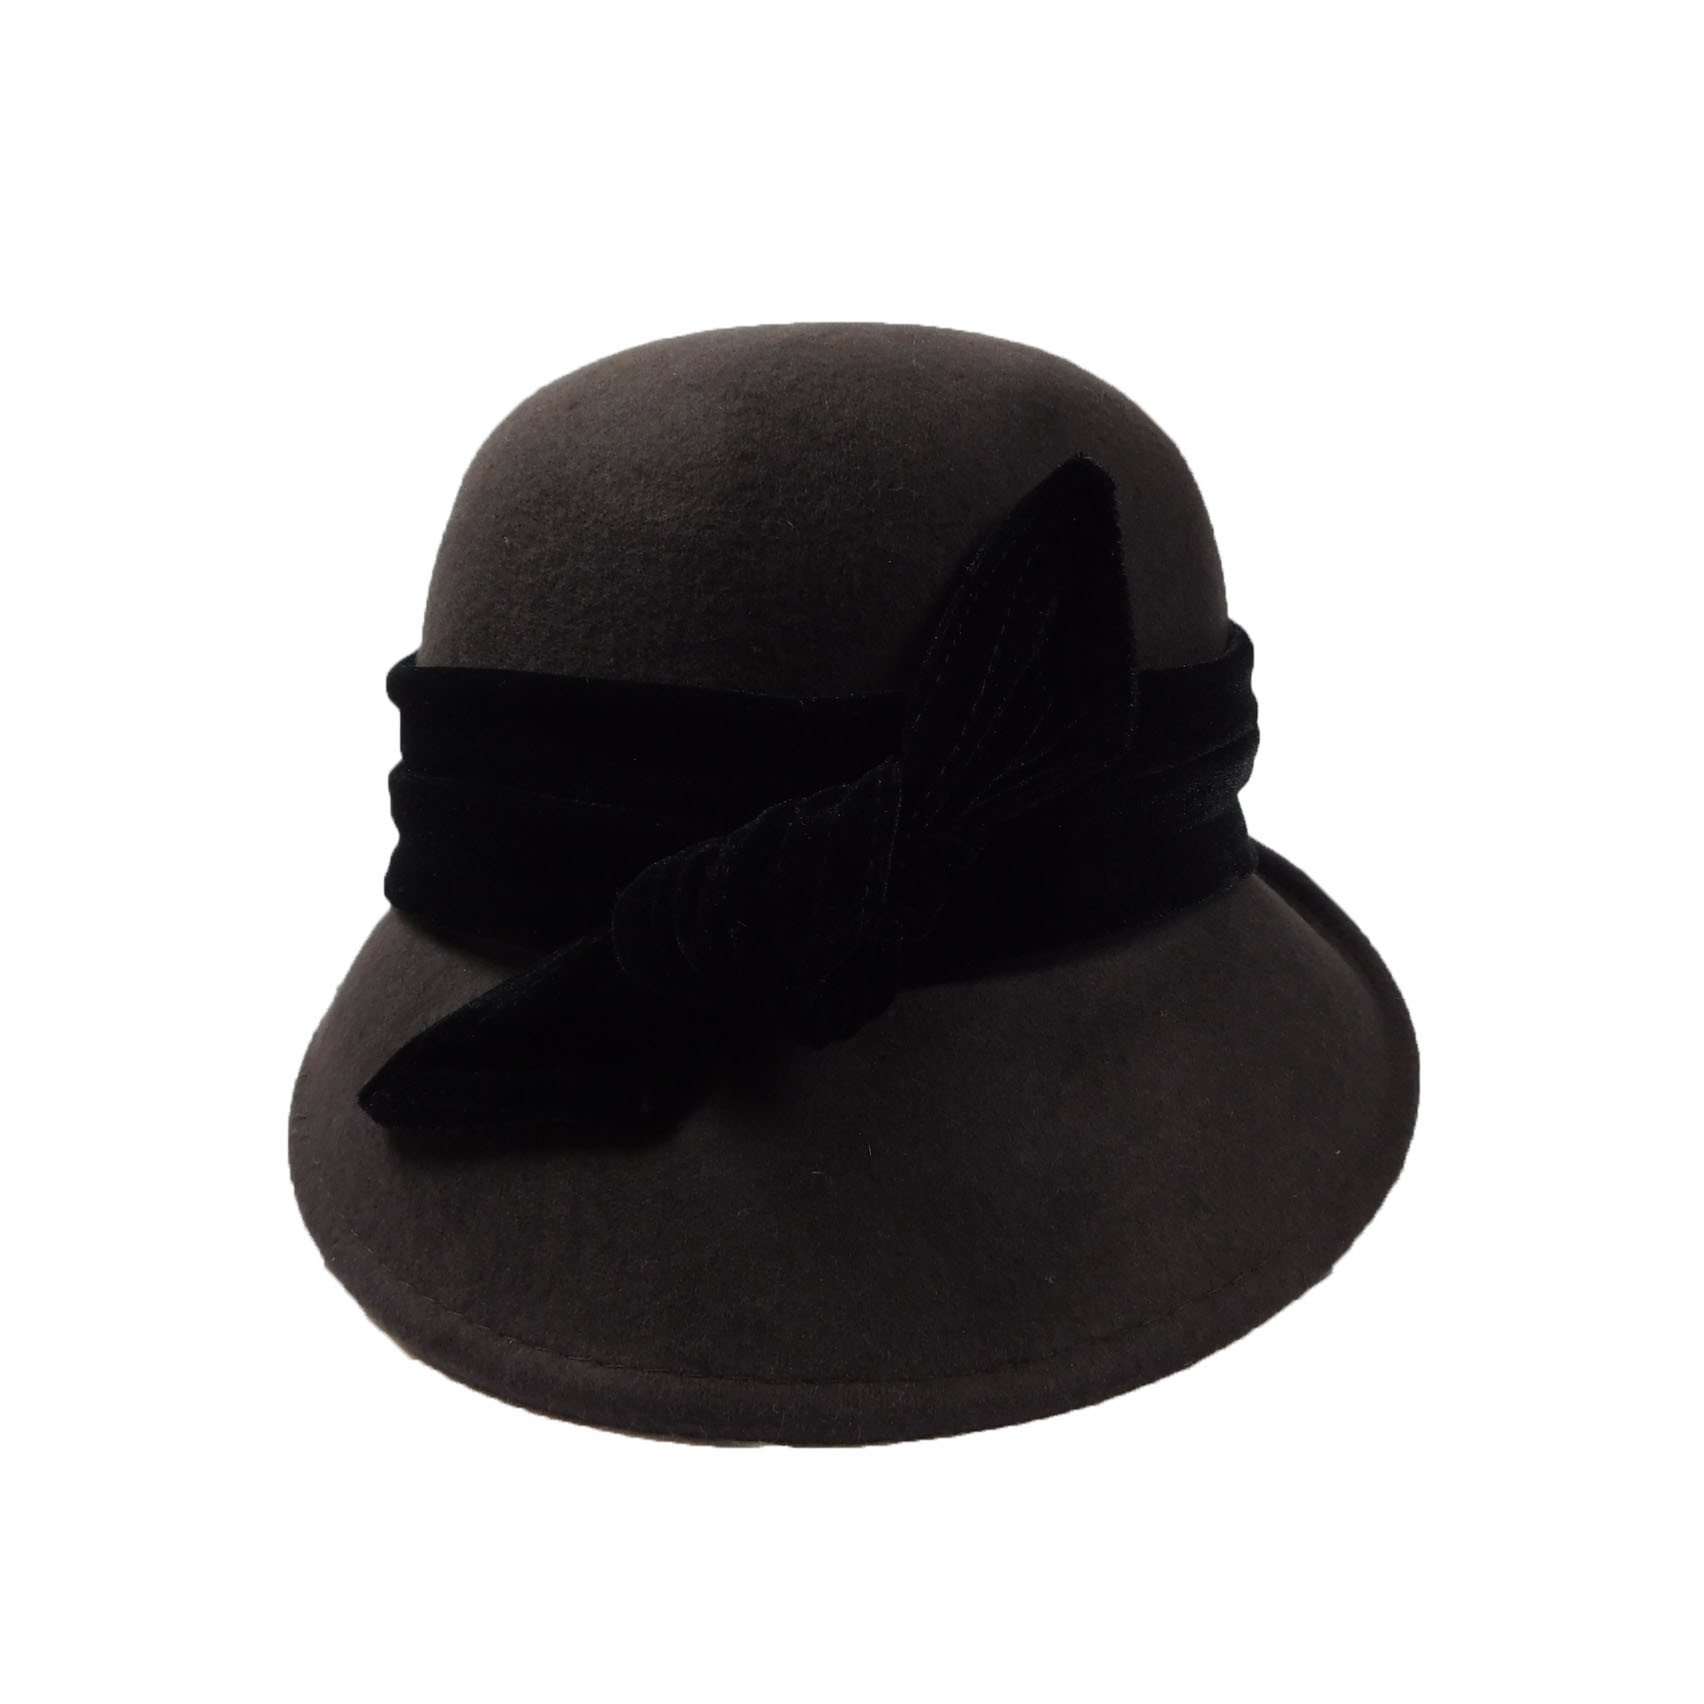 Curled Brim Slanted Cloche Wool Hat with Velvet Bow - Scala Hats Cloche Scala Hats lf170ch Chocolate  